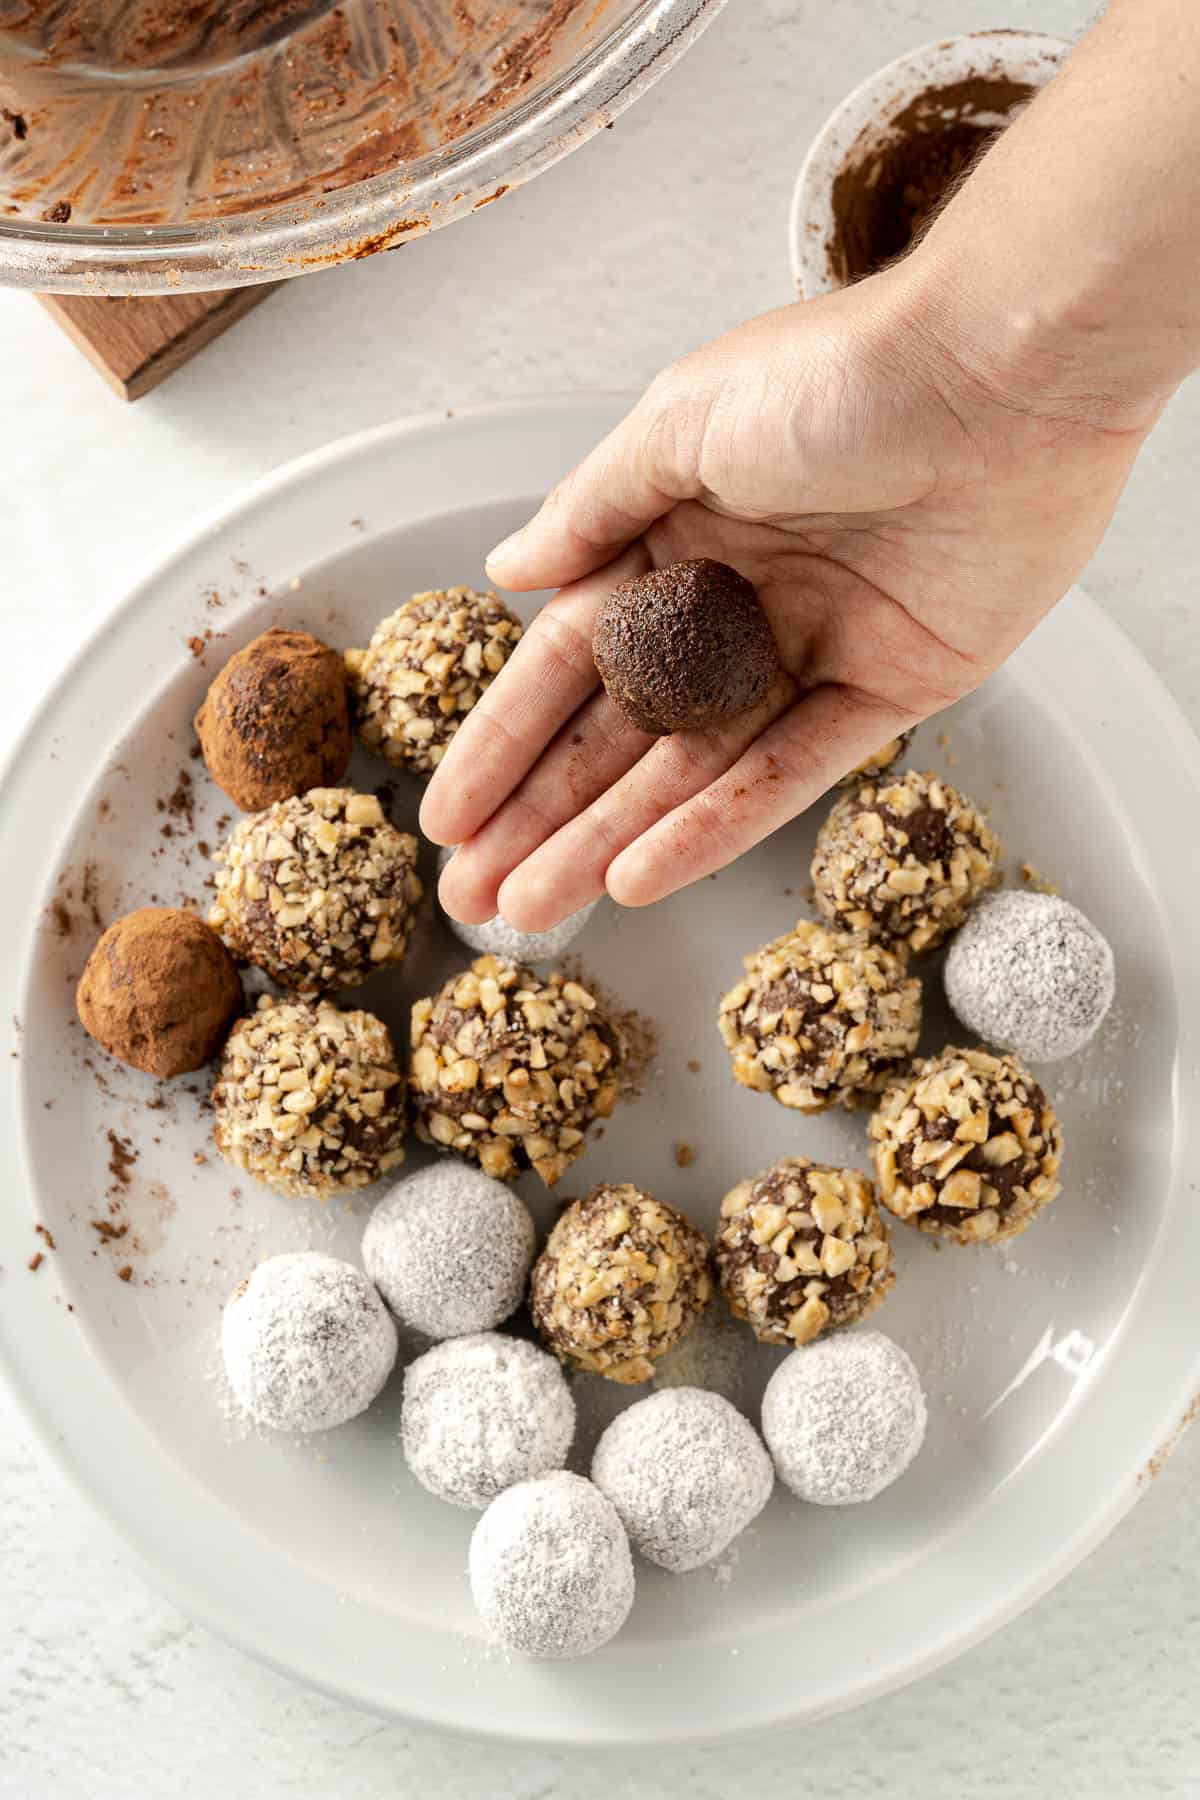 a plate of chocolate truffles, rolled up and coated in coconut, cocoa powder and crushed walnuts